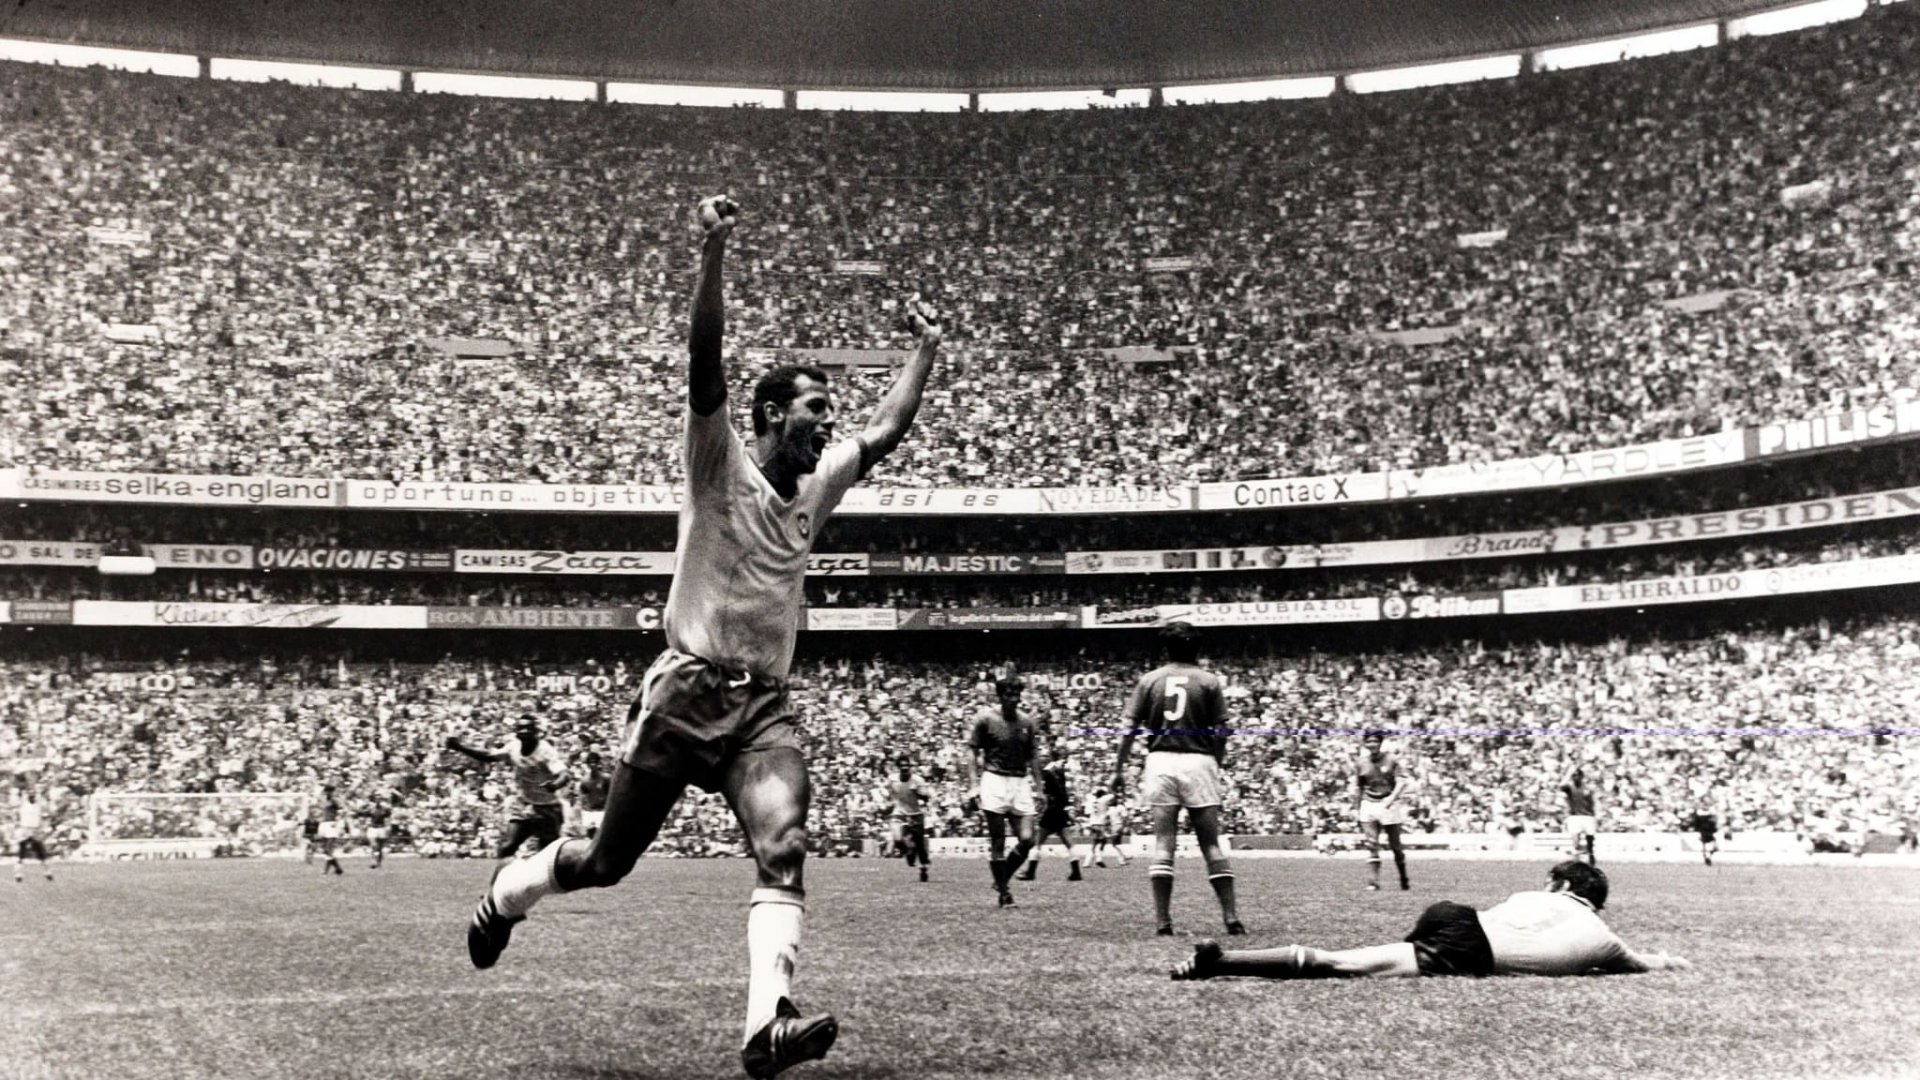 Carlos Alberto celebrates scoring for Brazil against Italy in 1970 World Cup